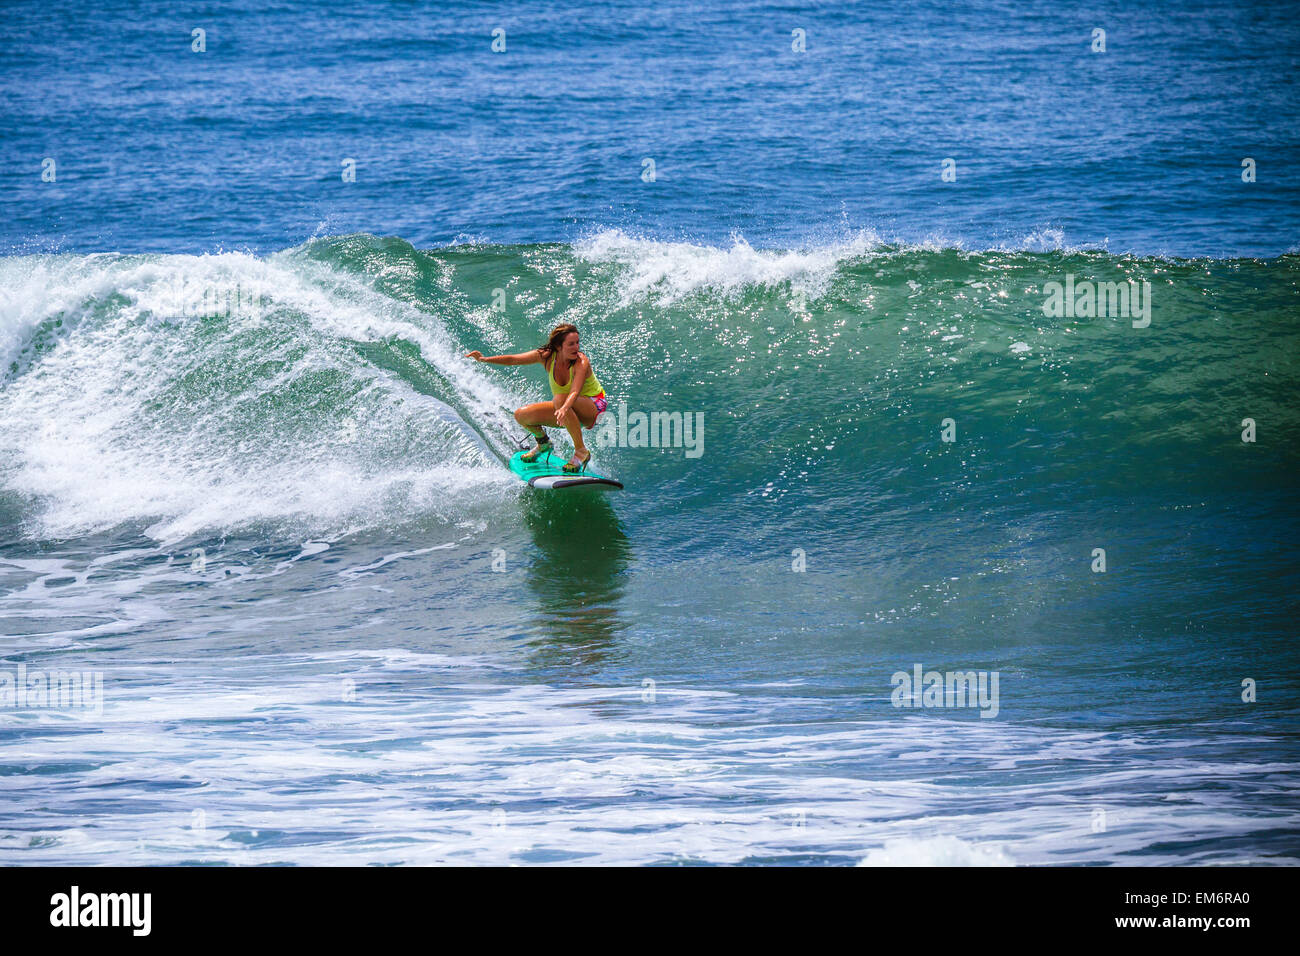 Surfer girl catches wave in high heels. Stock Photo